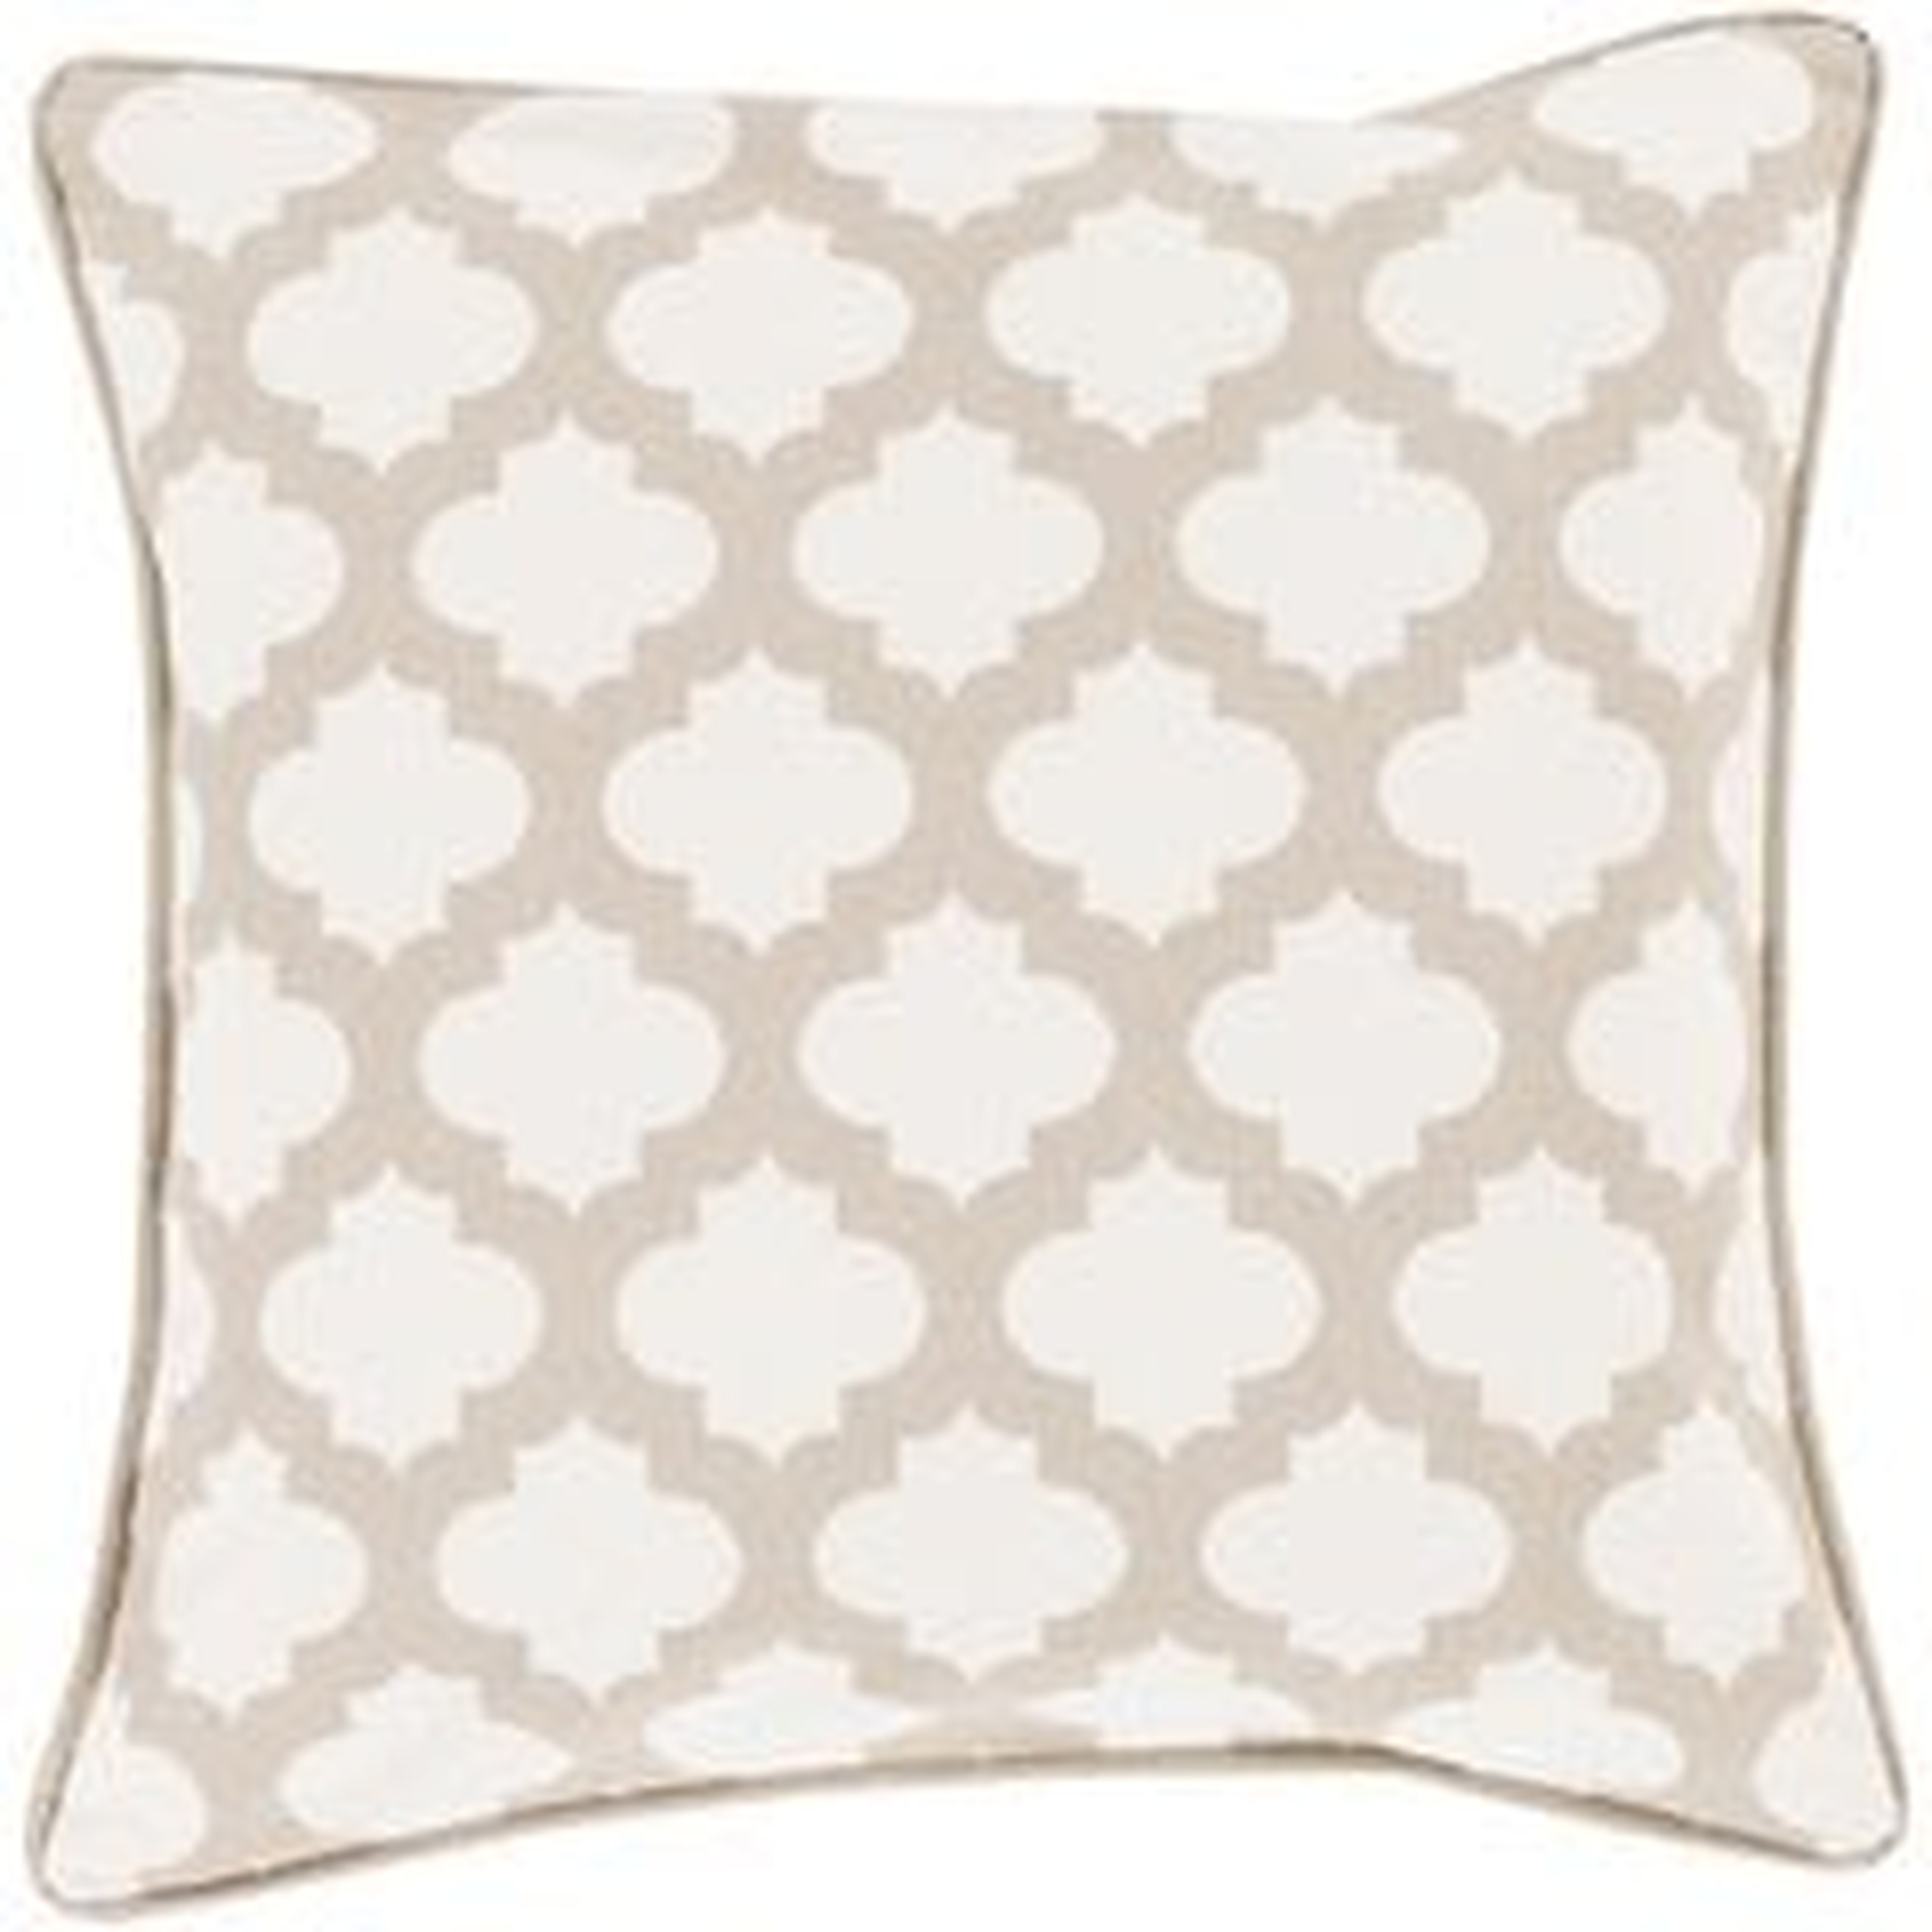 Morrocan Printed Lattice Throw Pillow, 18" x 18", with down insert - Surya